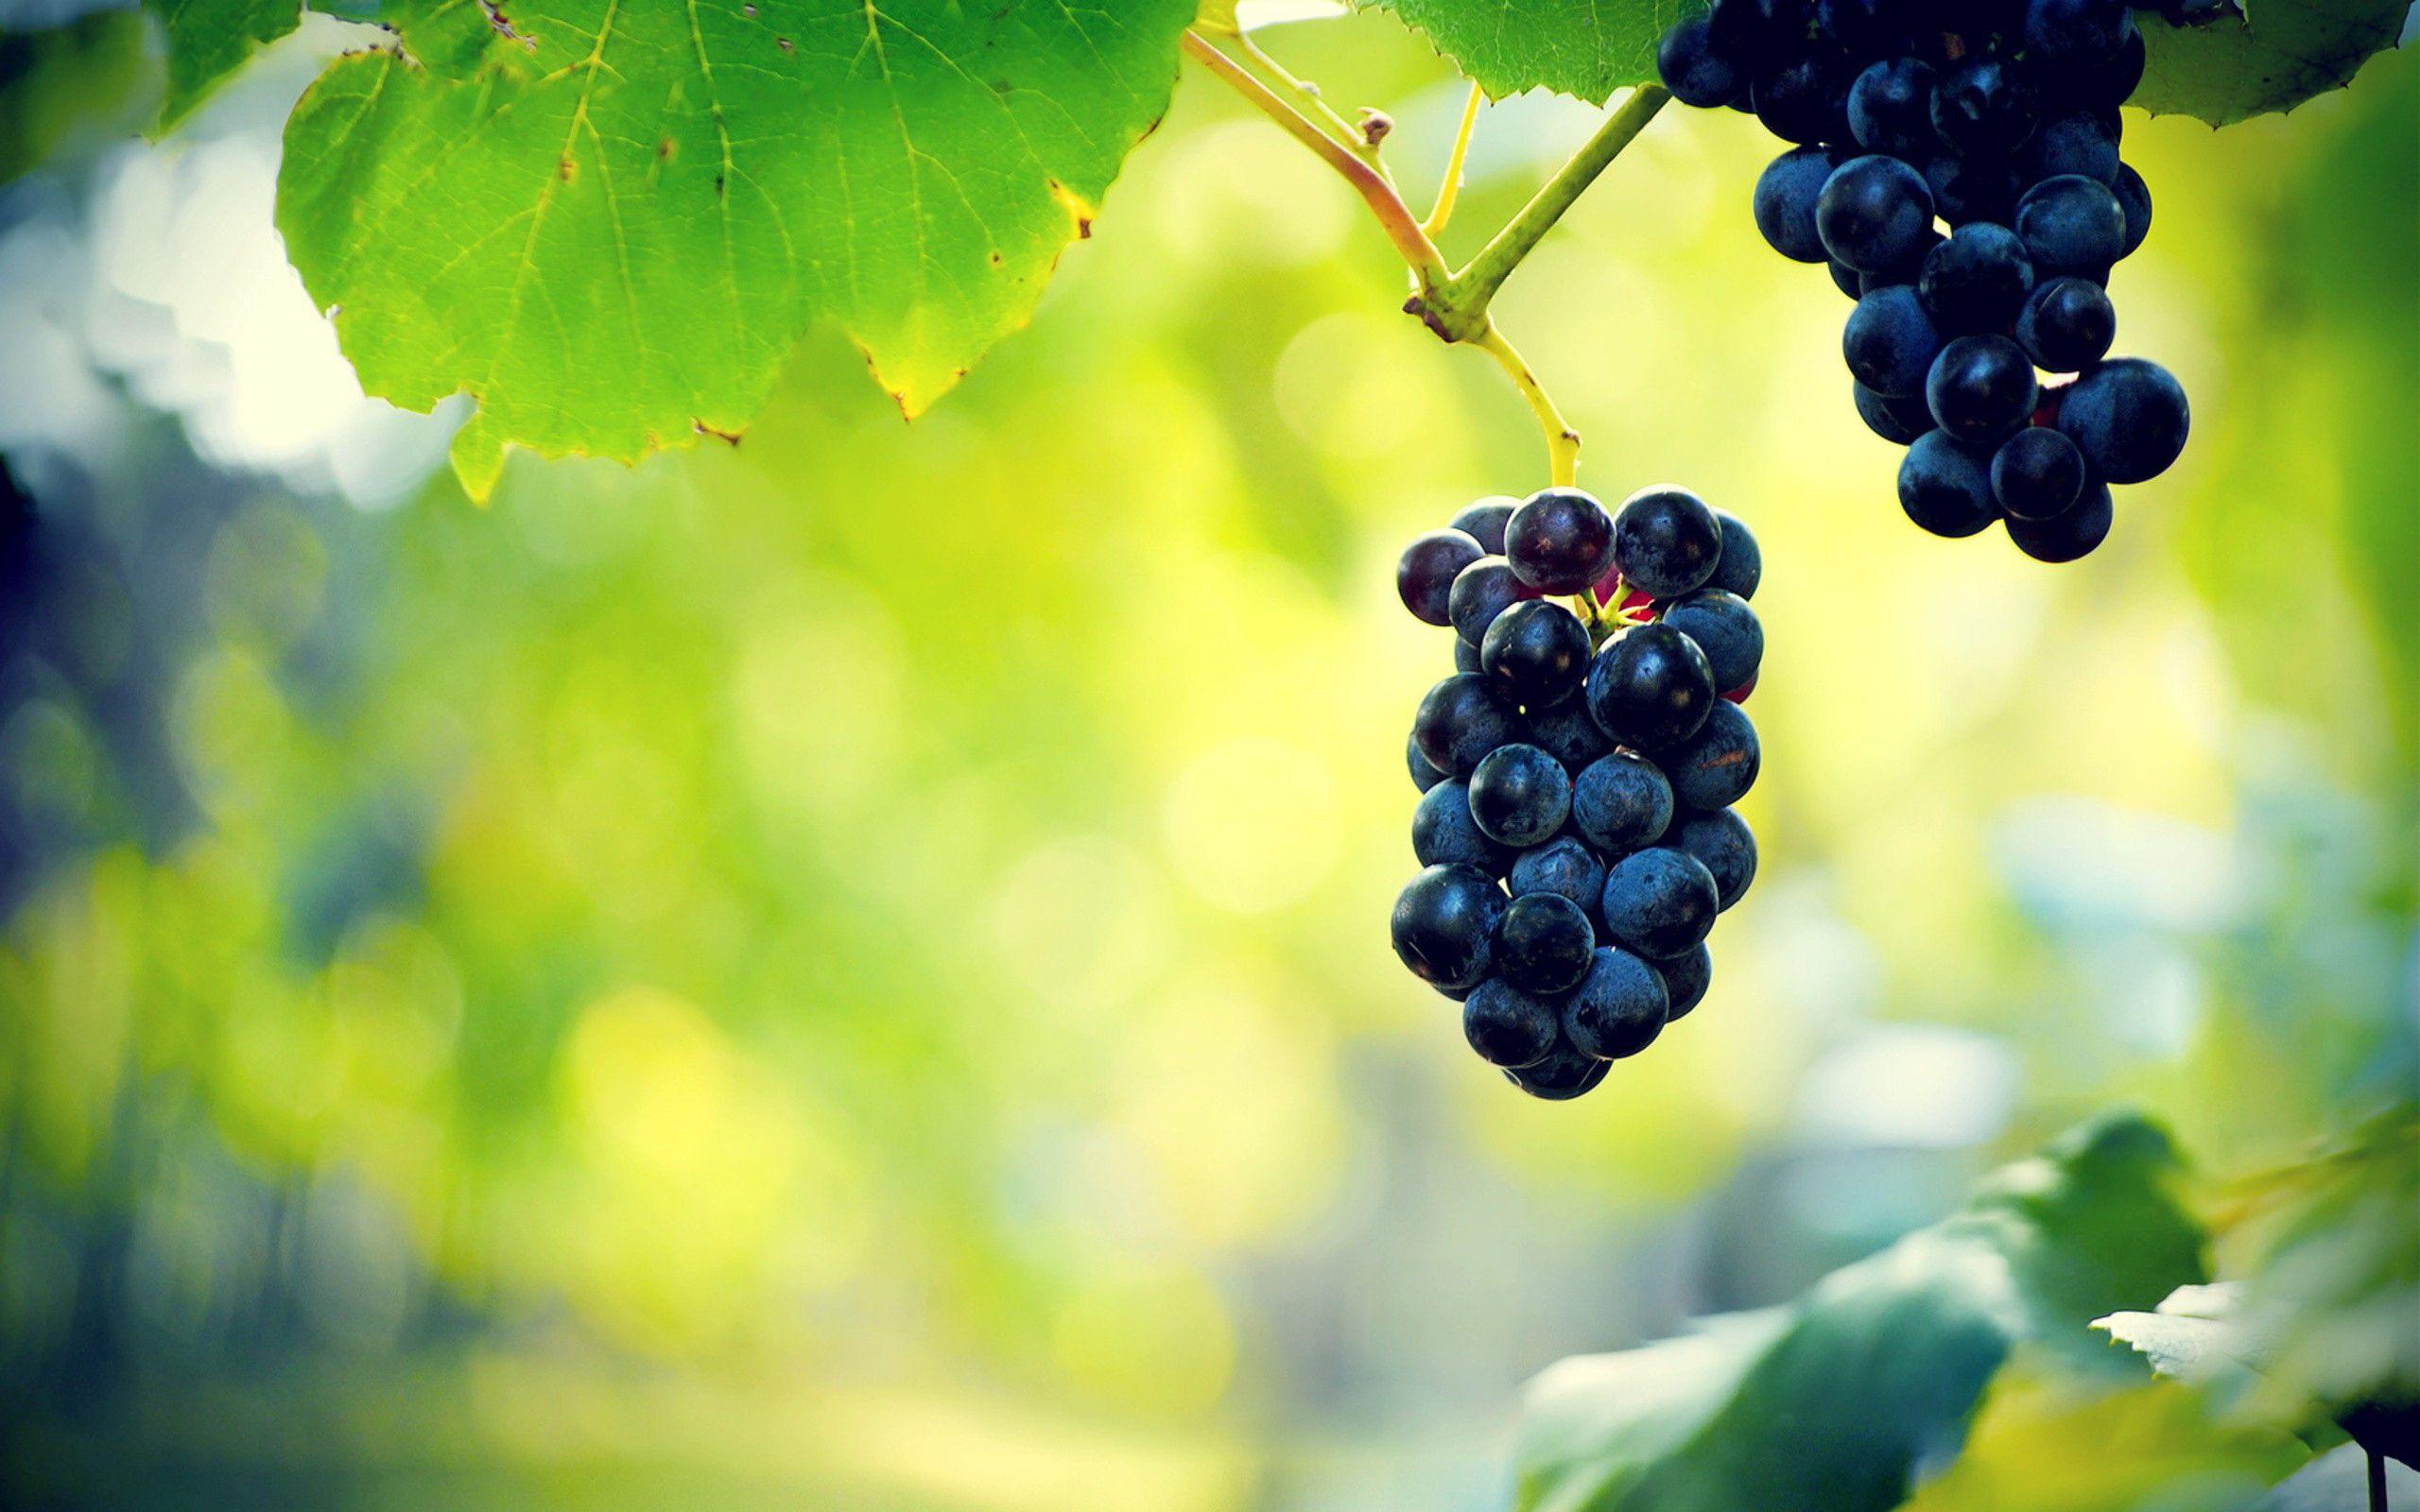 Grapes Wallpaper High Quality